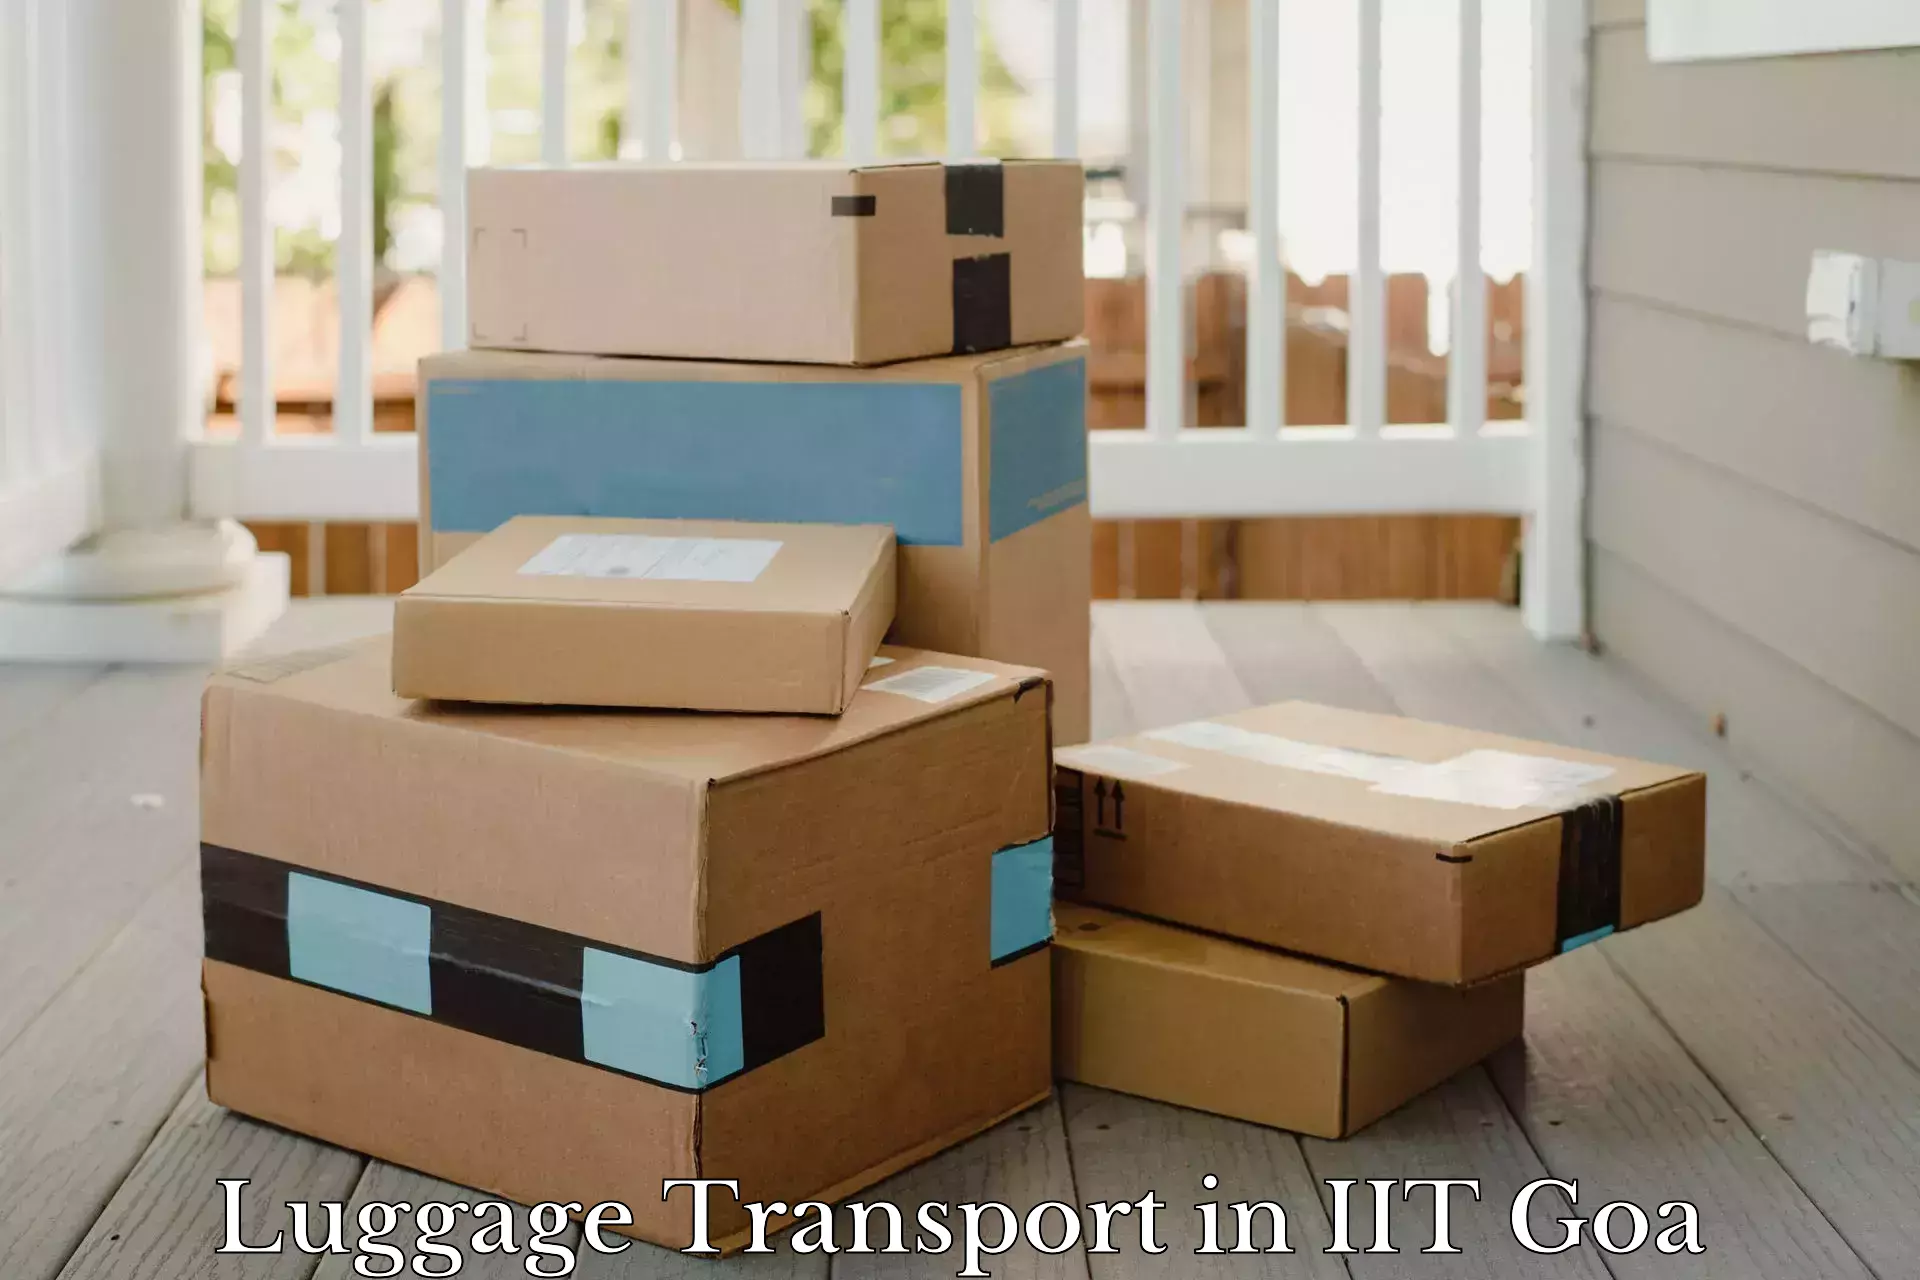 Instant baggage transport quote in IIT Goa